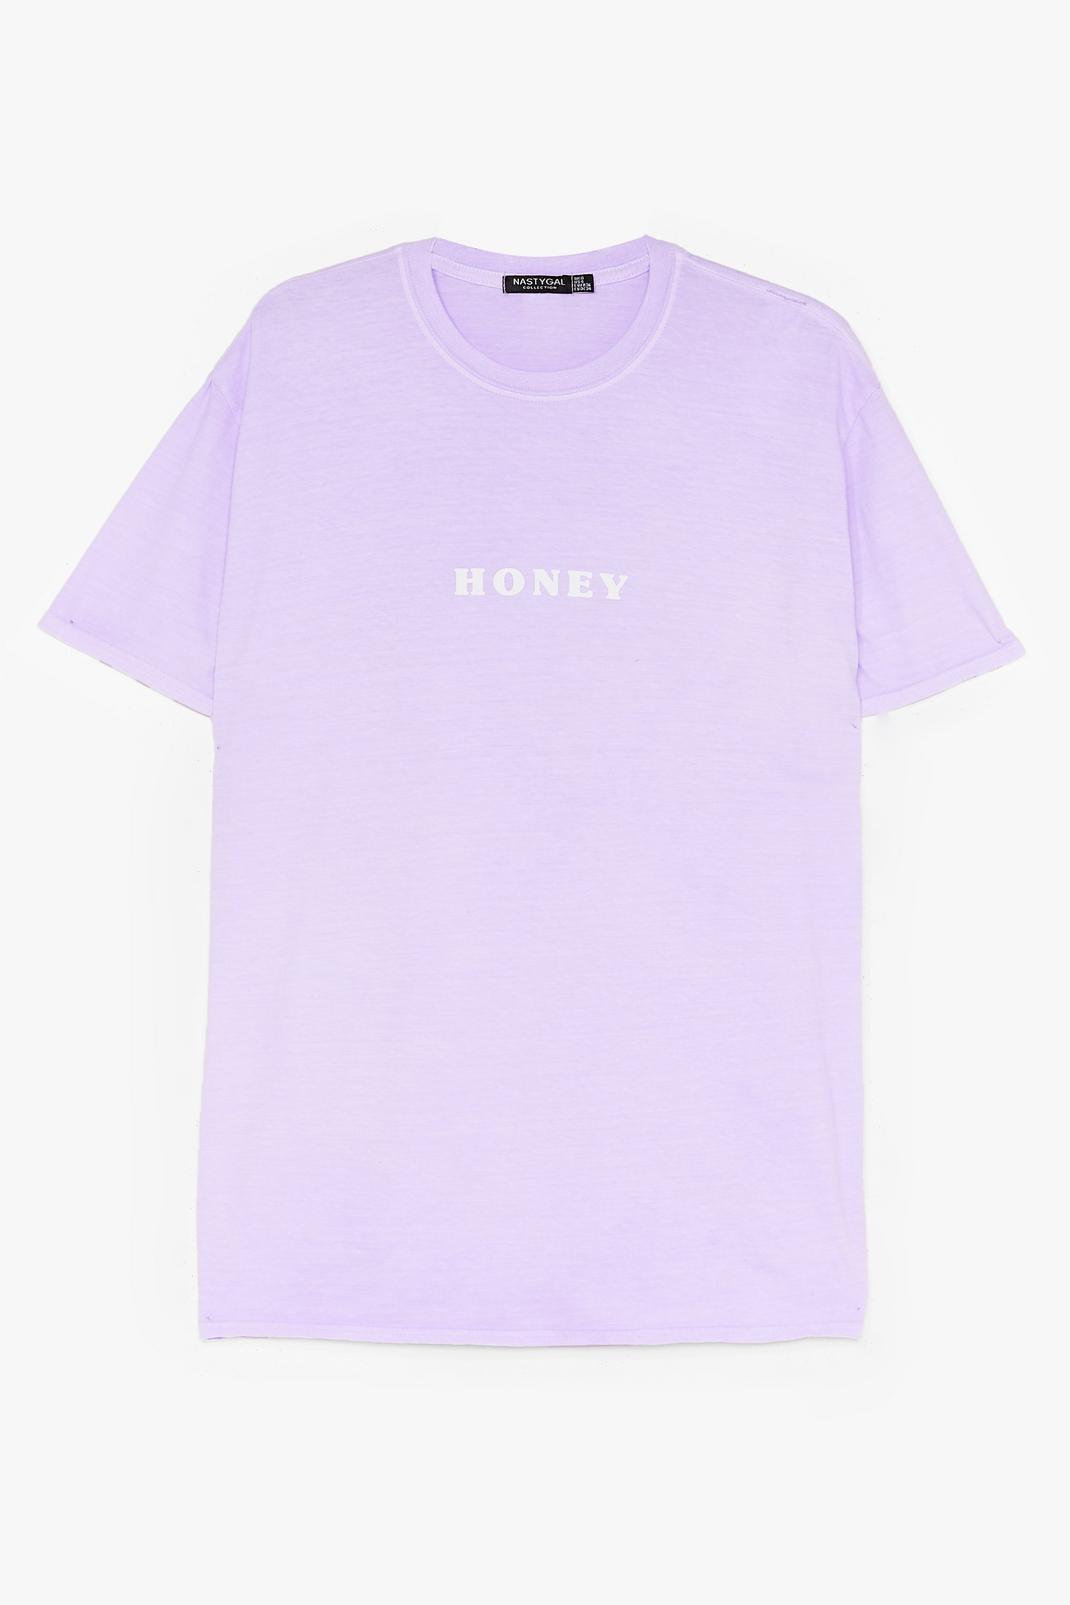 Not Your Honey Graphic Tee image number 1